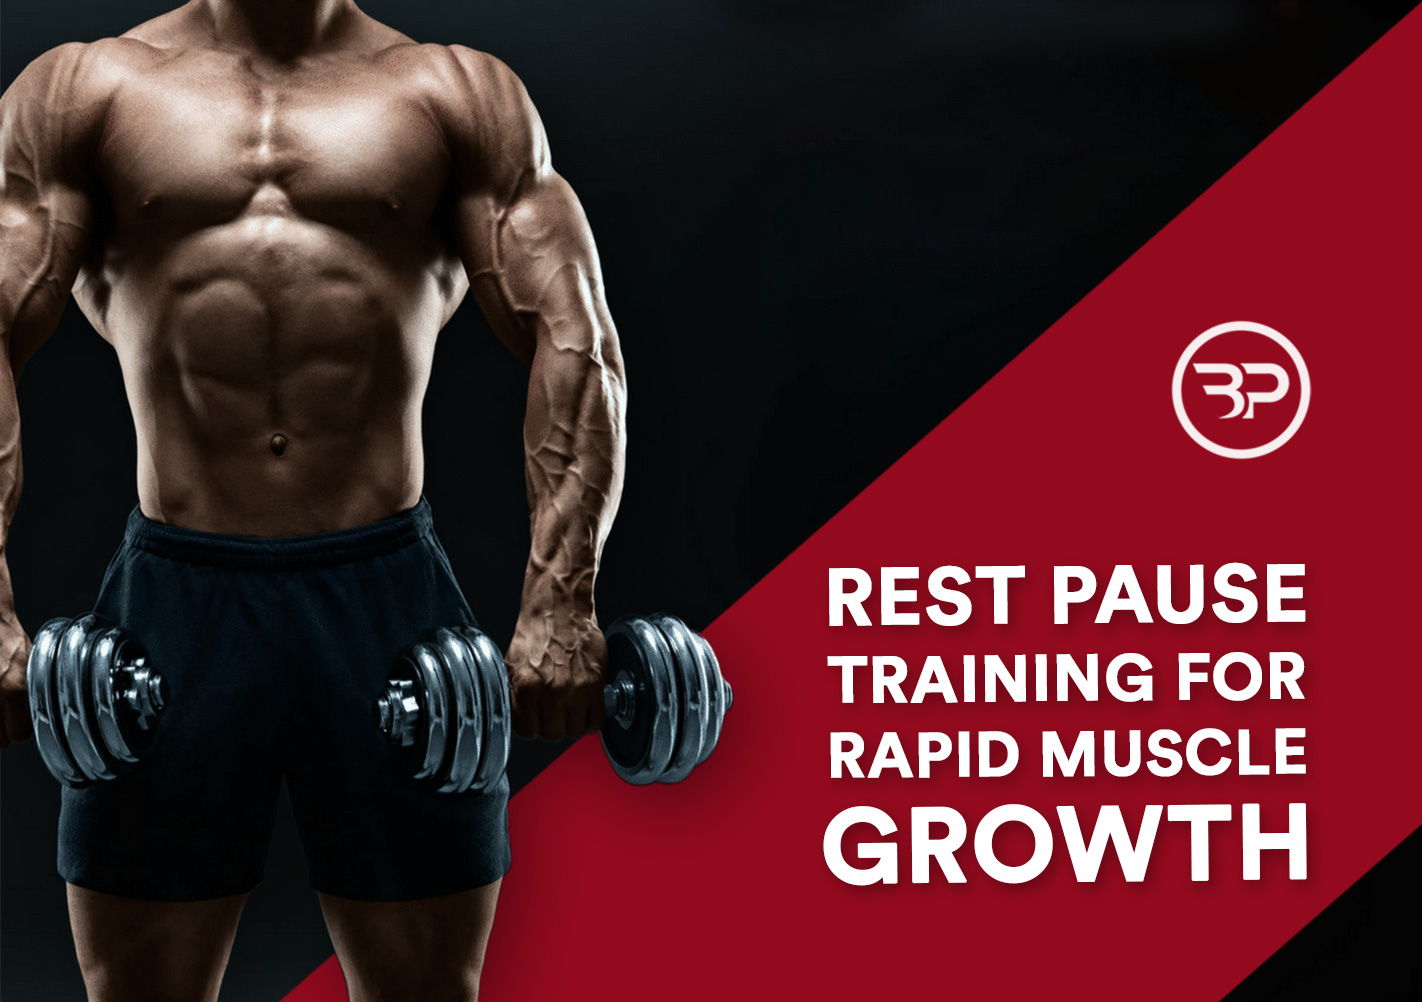 Get More Results in Less Time With Rest Pause Training — Treadaway